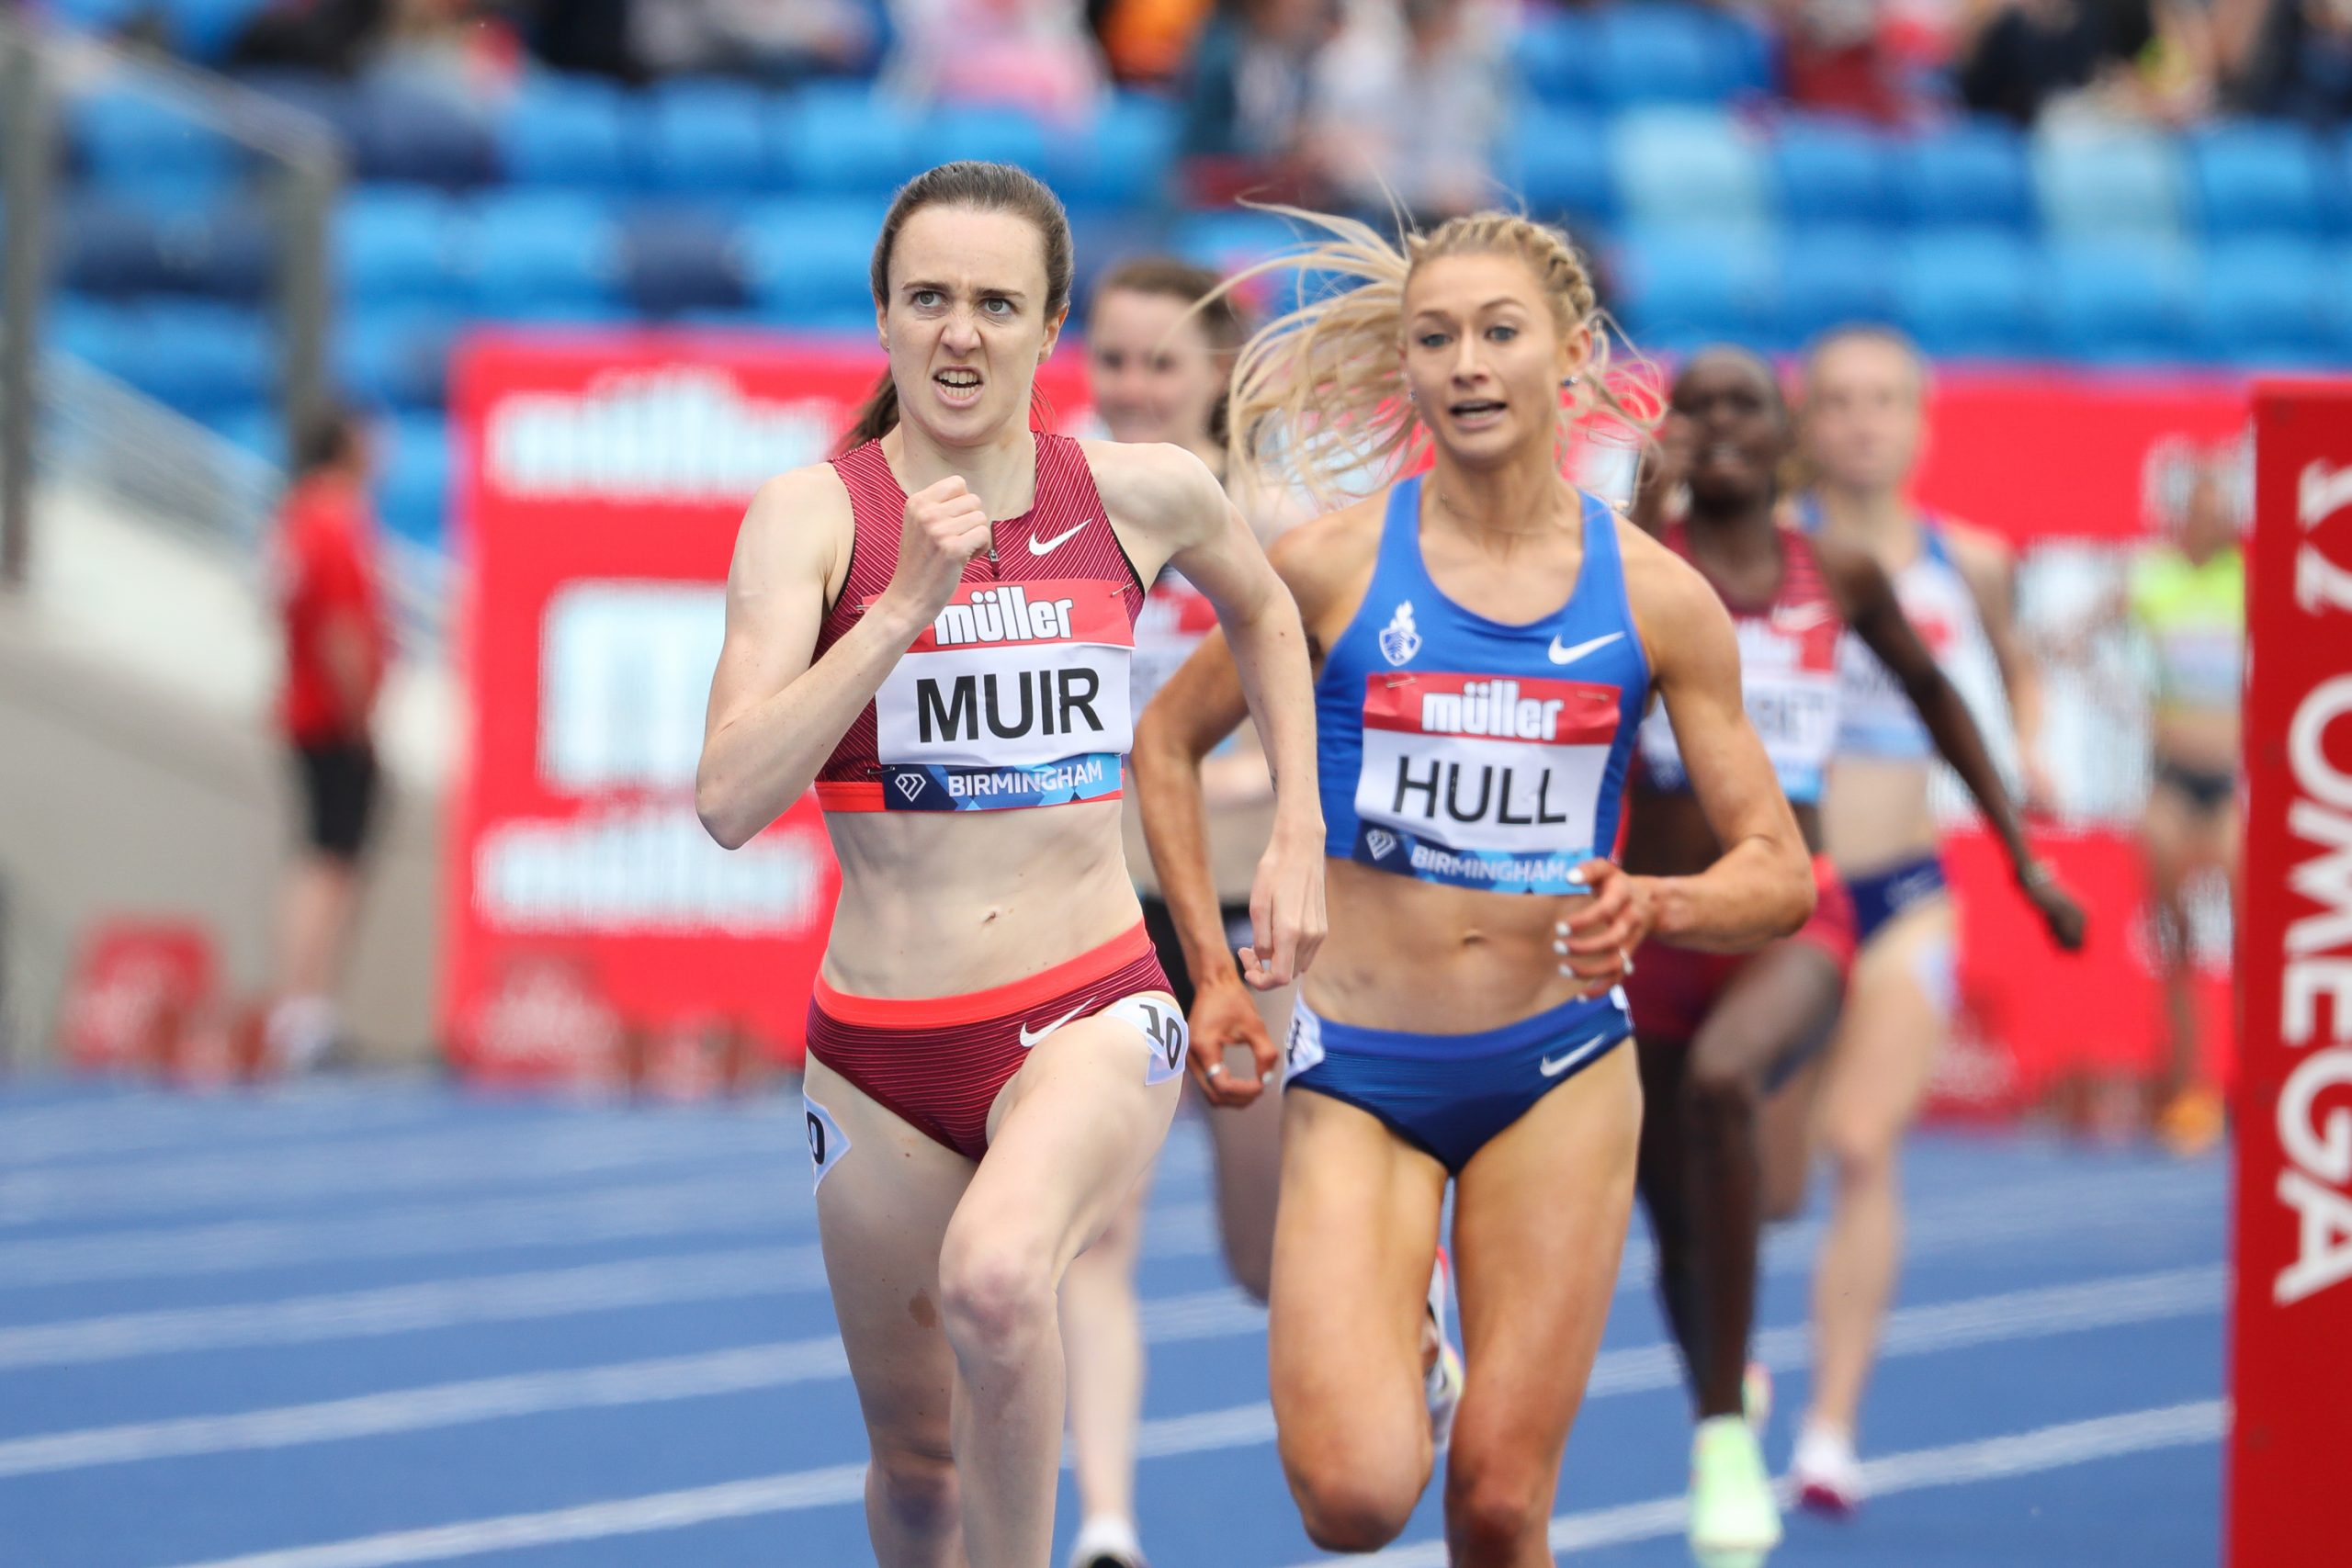 Laura Muir wins the womens 1500mm in a time of 4.02.82 